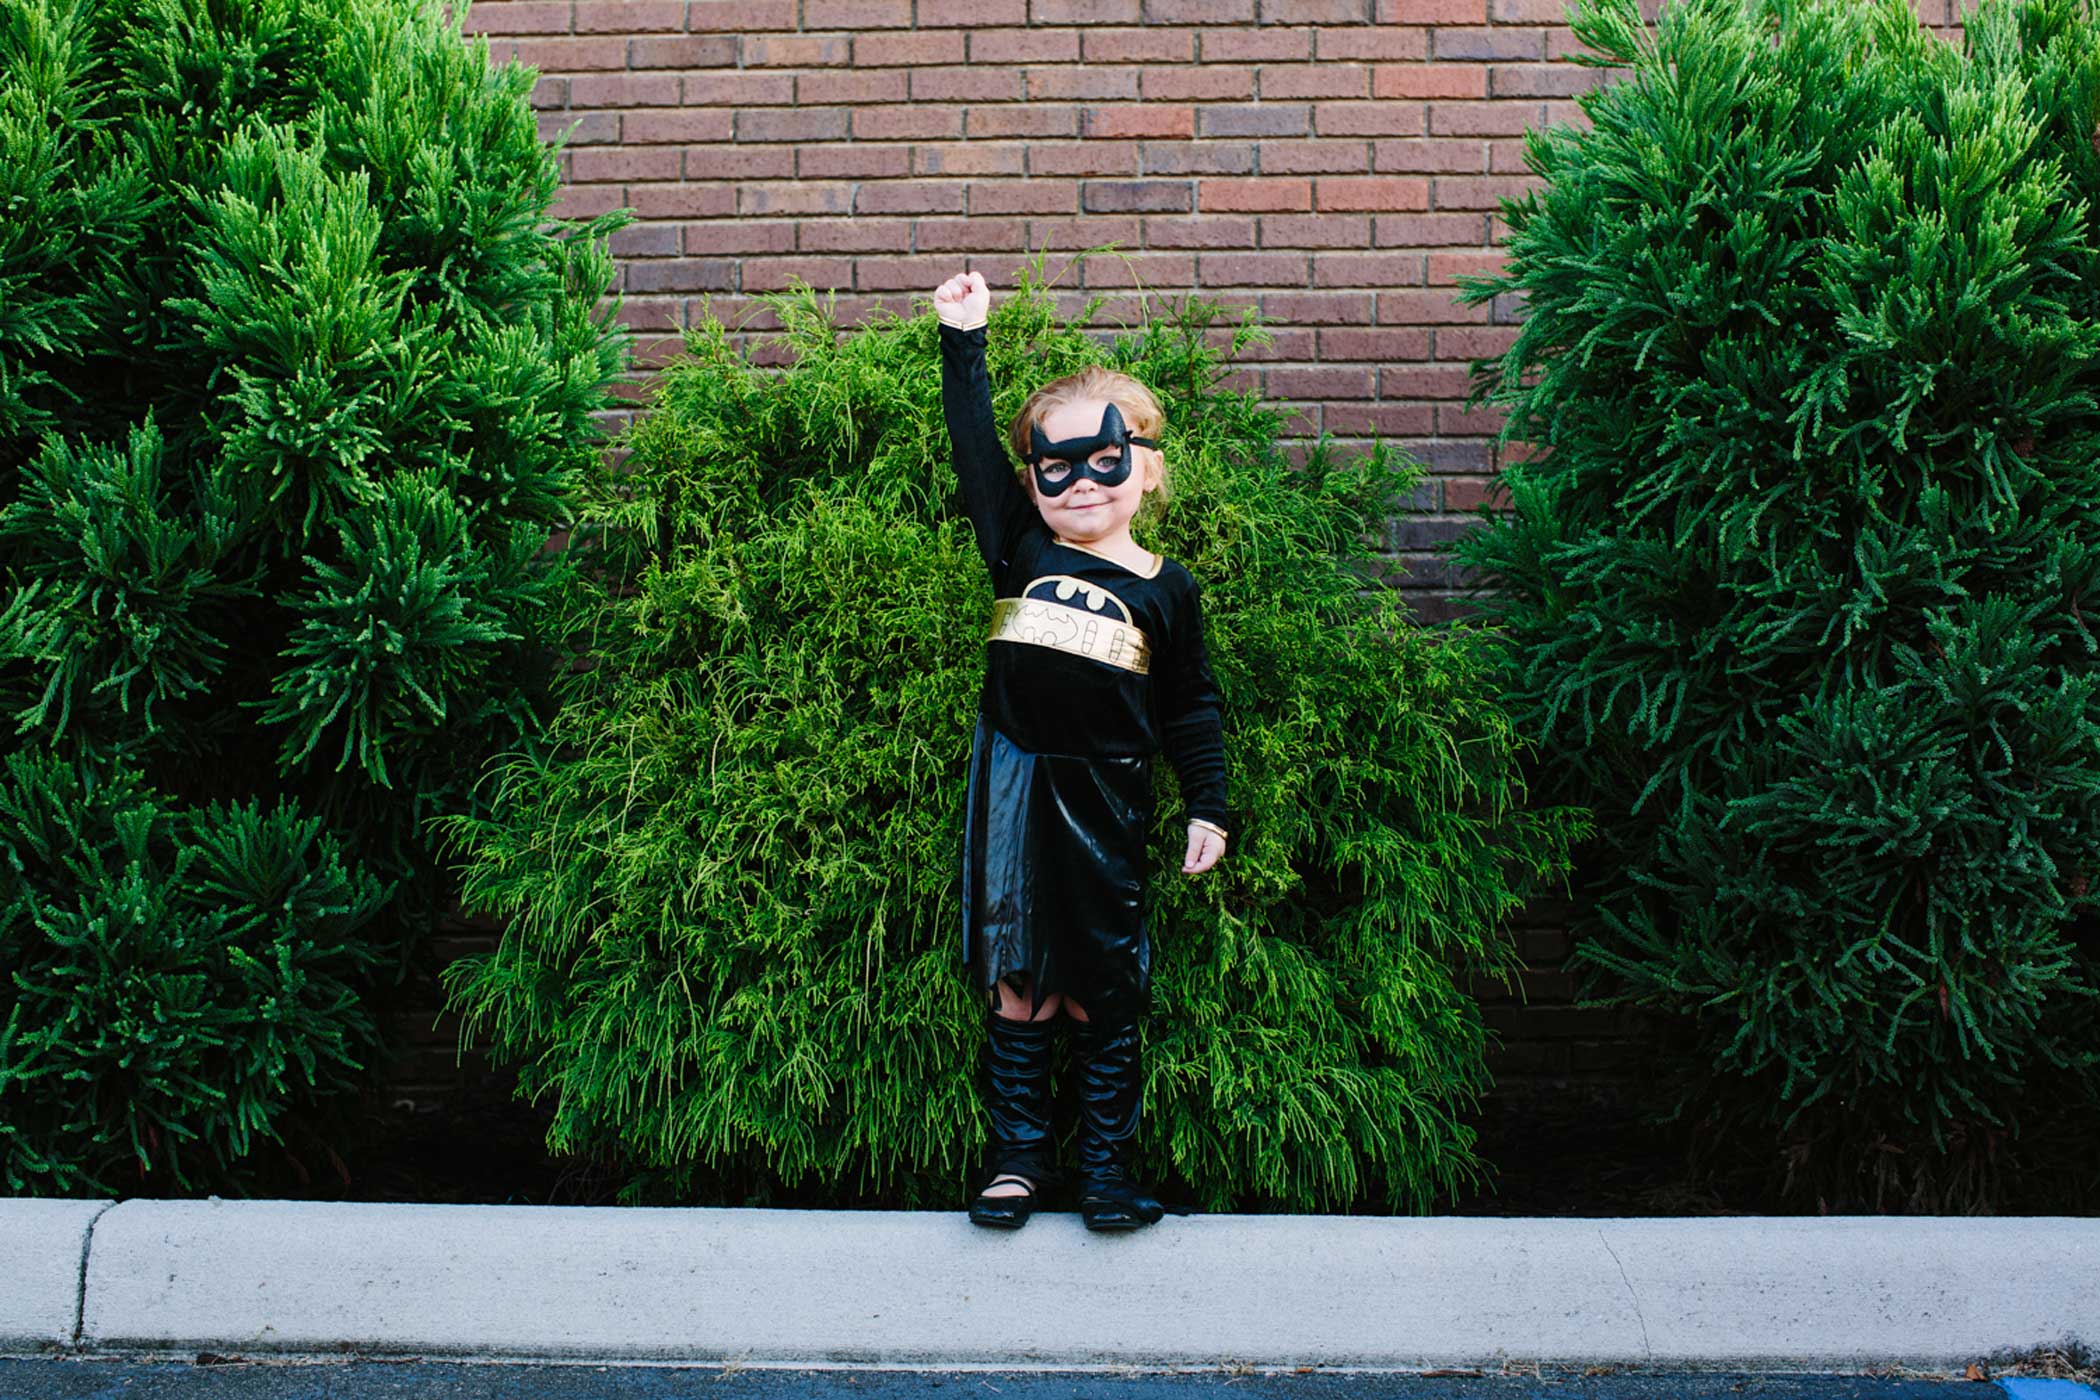 Alean Hillyard, 4, was one of hundreds of children who dressed like superheroes for Jacob Hall's visitation at Oakdale Baptist Church in Townville. (Dustin Chambers for The Trace)